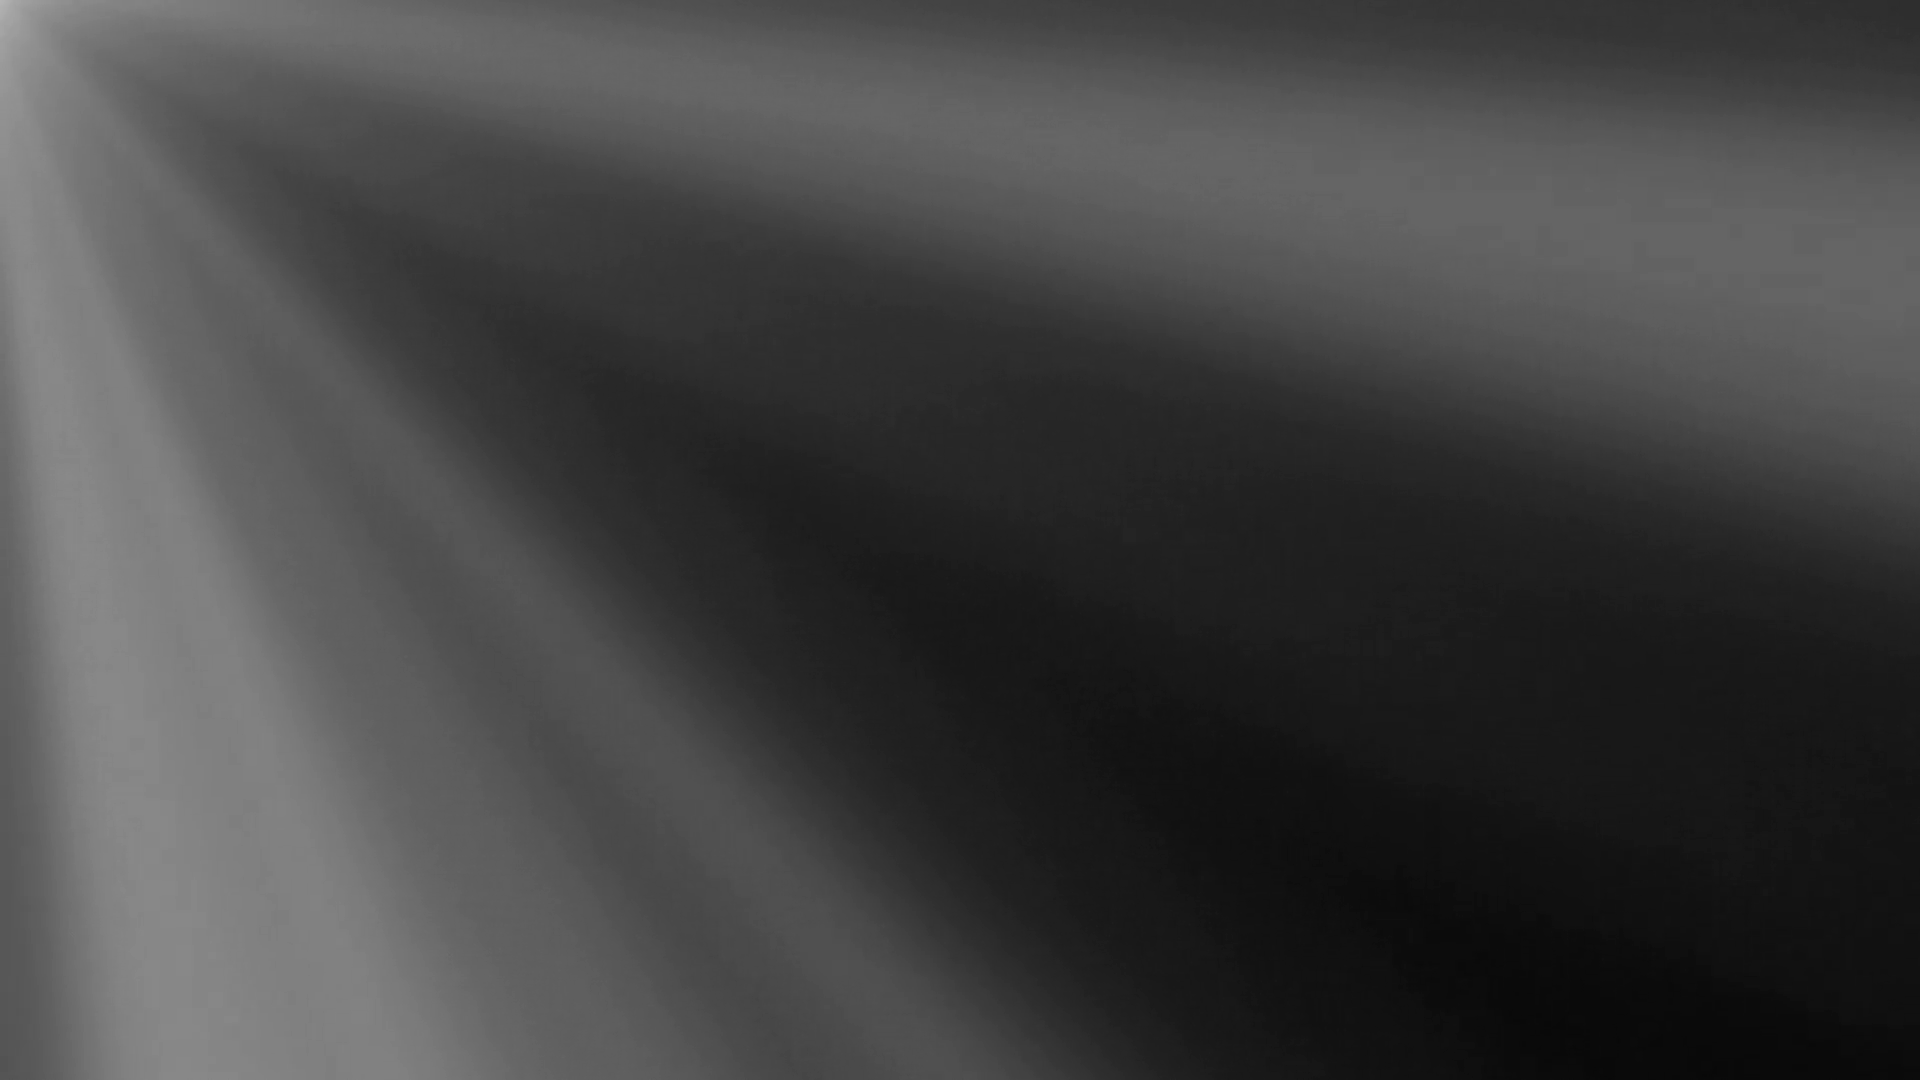 Looping clip of light rays on a black background. Animation created